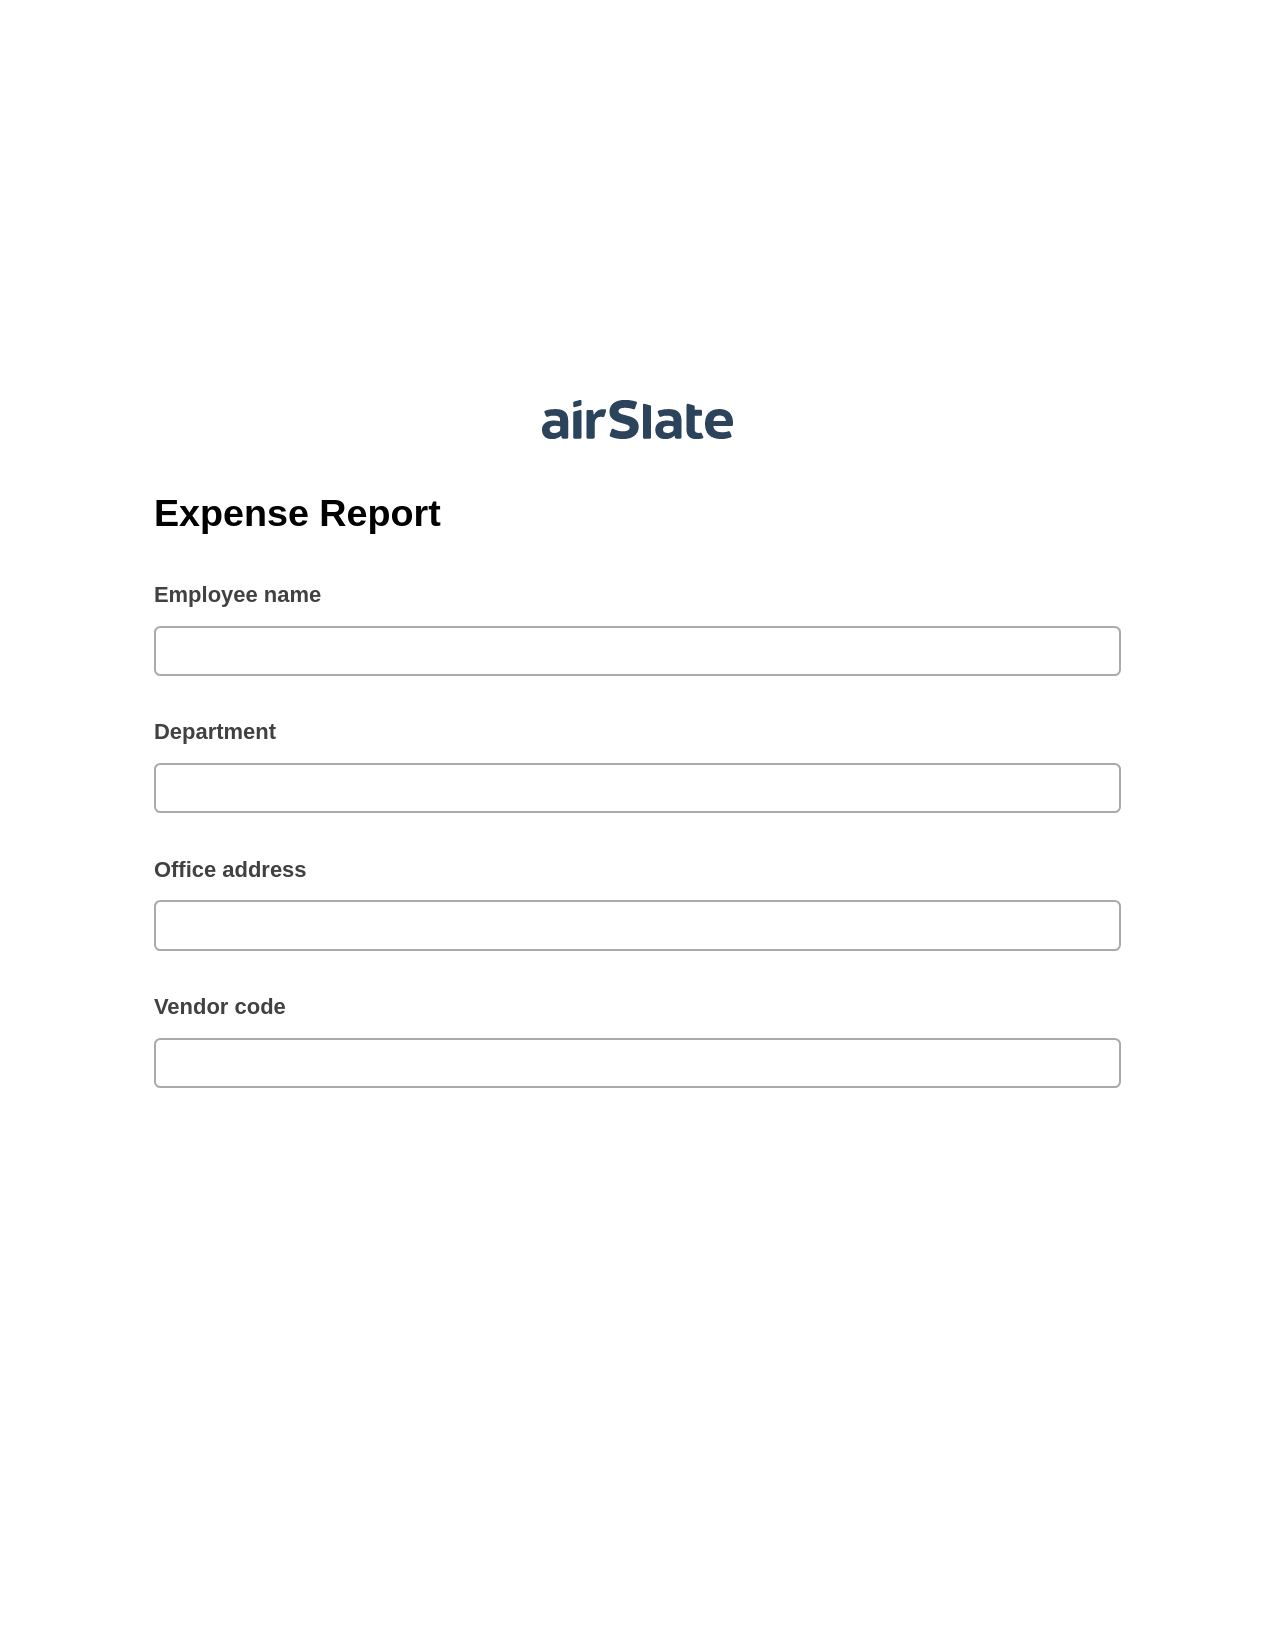 Multirole Expense Report Pre-fill from CSV File Bot, SendGrid send Campaign bot, Archive to SharePoint Folder Bot